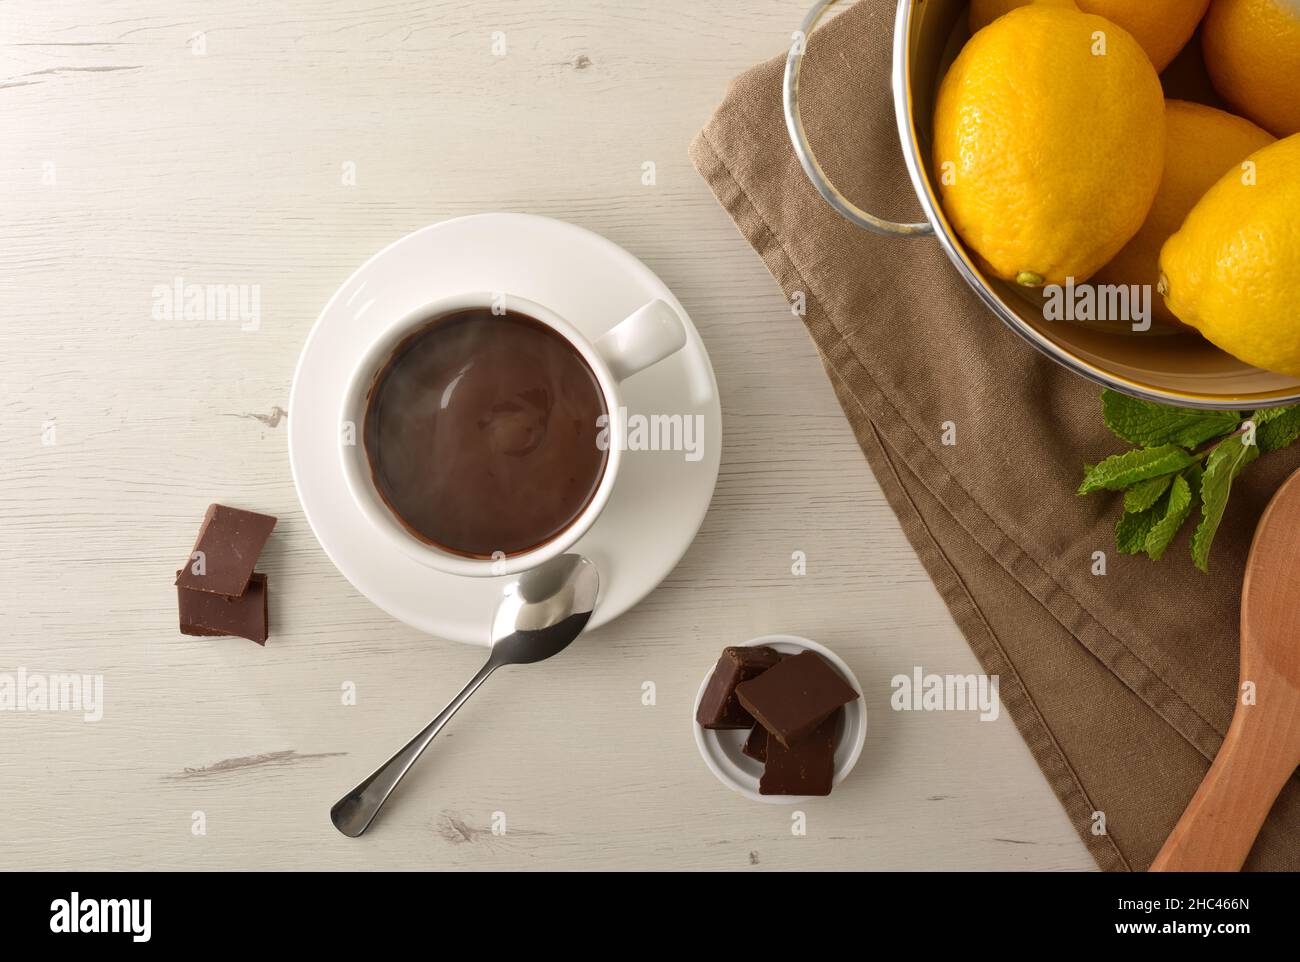 Hot chocolate in white ceramic mug, chocolate pieces in bowl on wooden table and lemons. Top view. Horizontal composition. Stock Photo